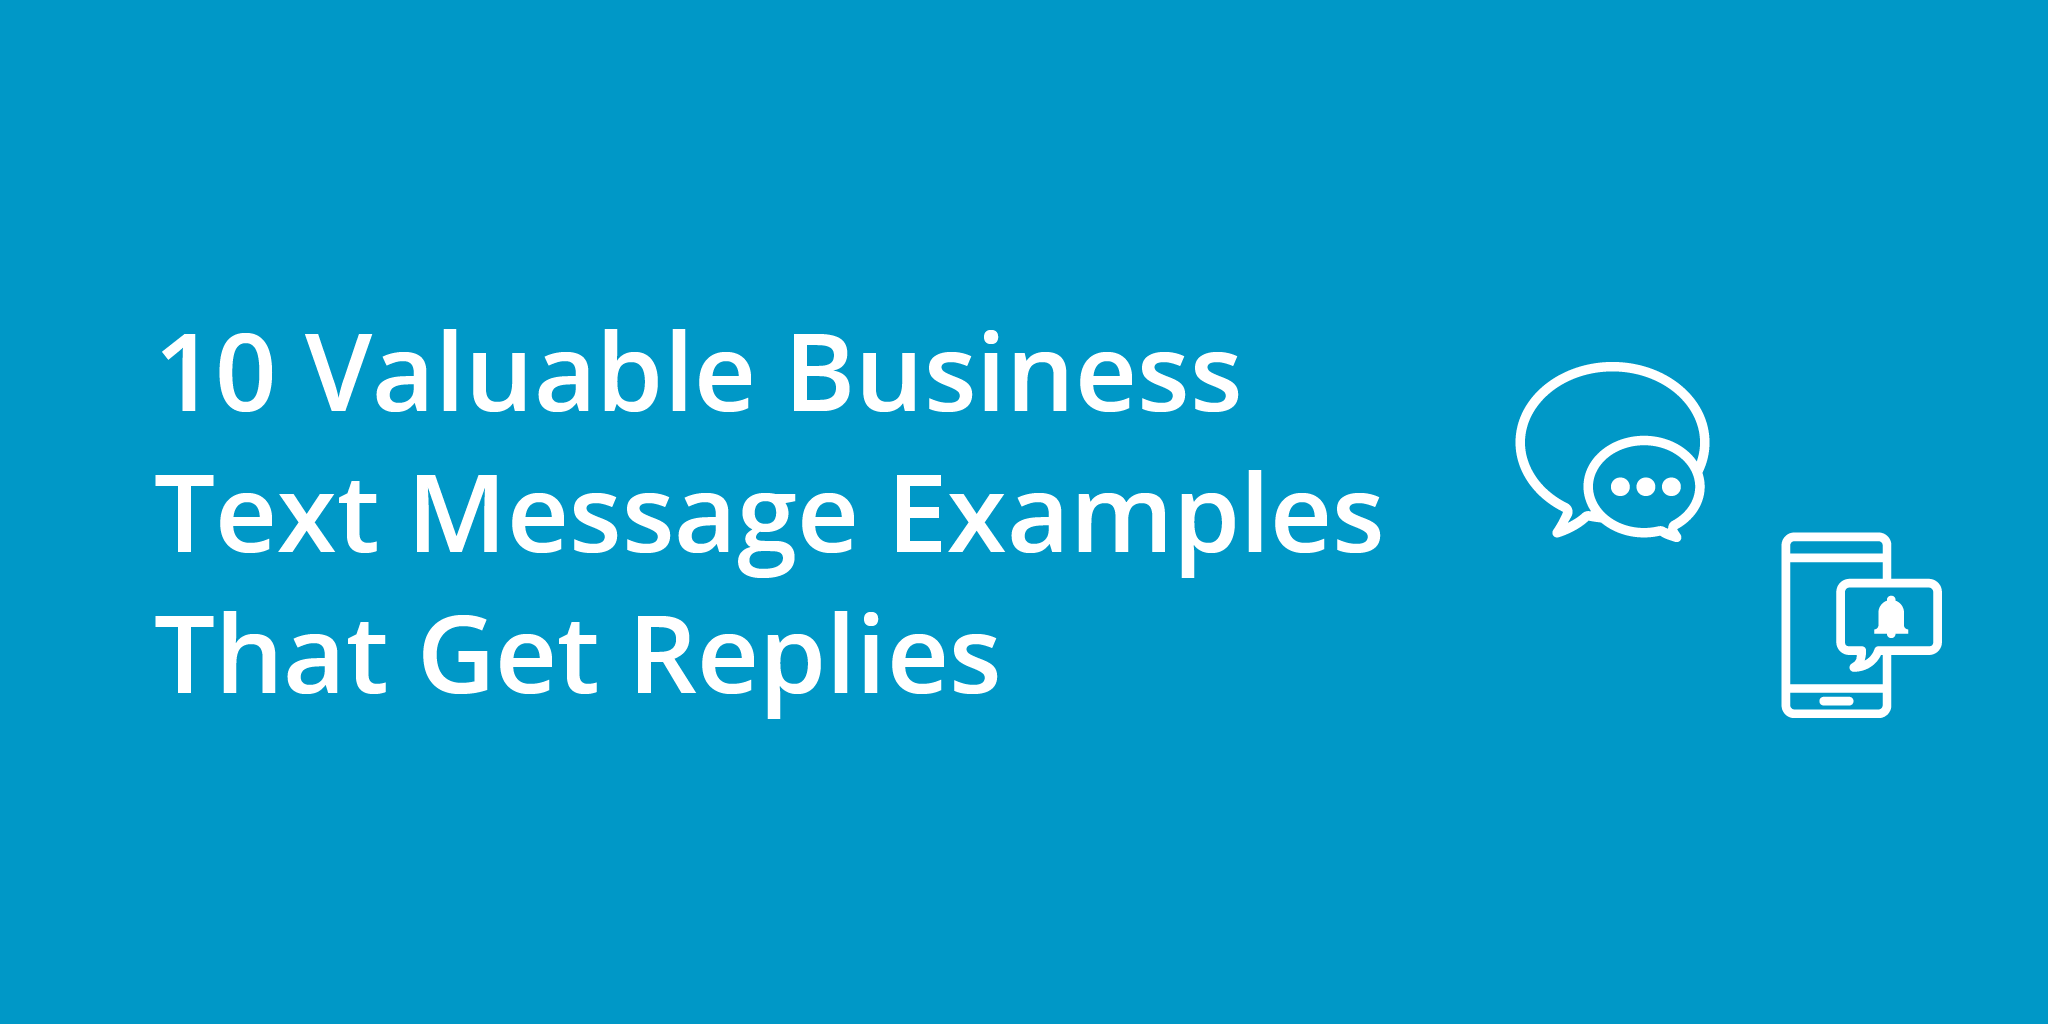 10 Valuable Business Text Message Examples That Get Replies | Telephones for business